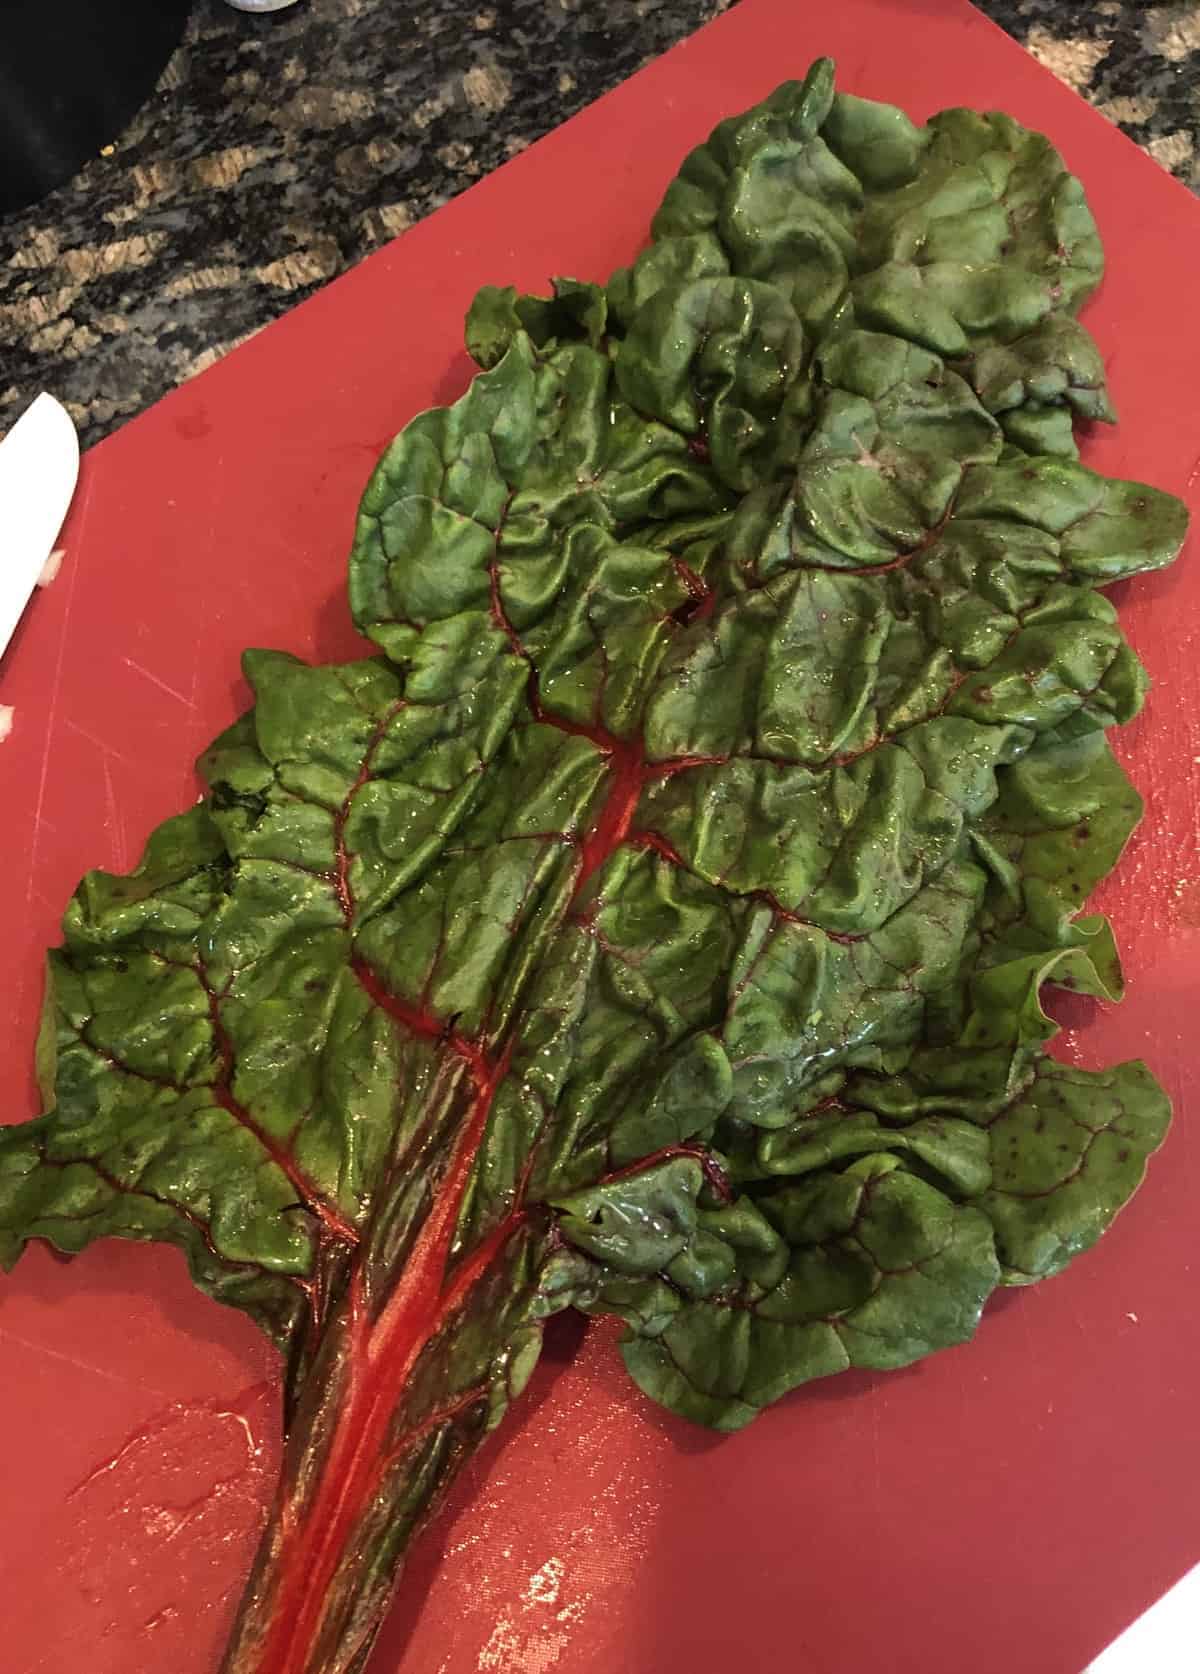 To show a picture of what Swiss Chard looks